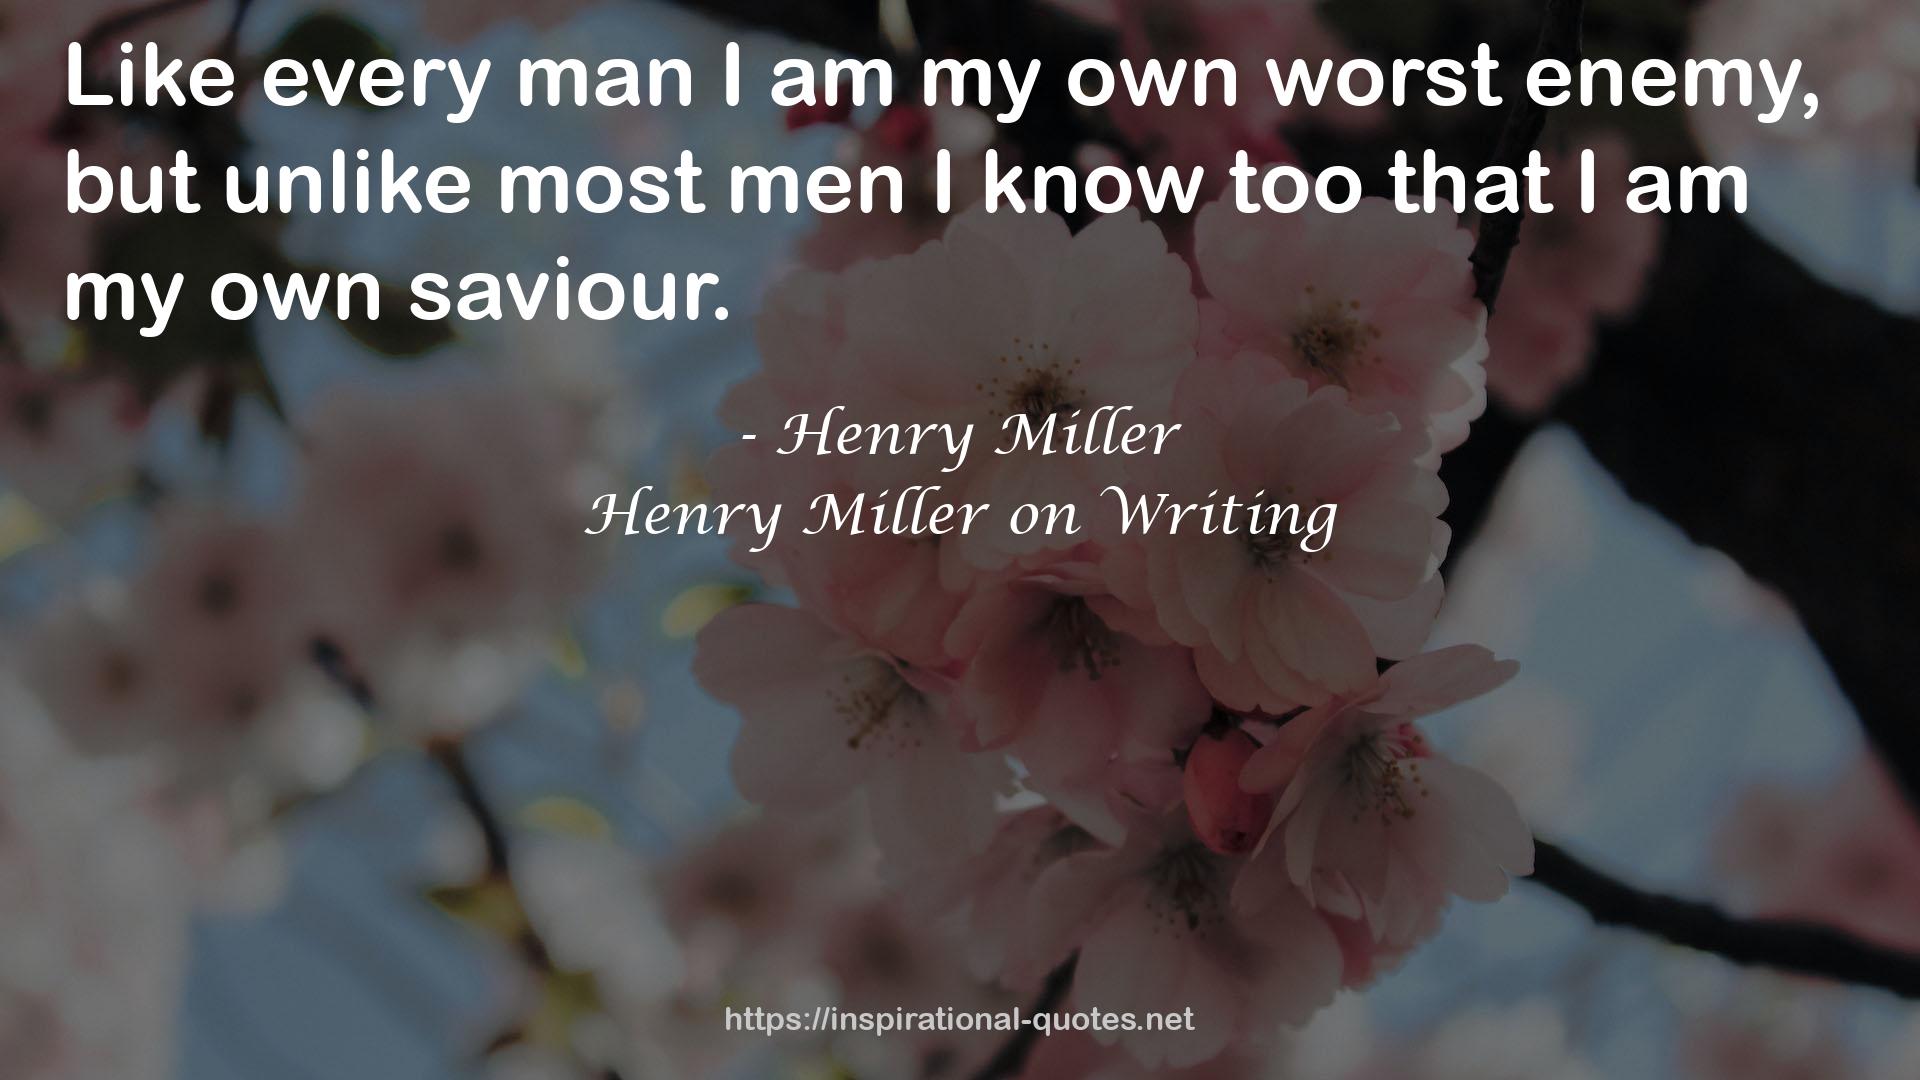 Henry Miller on Writing QUOTES